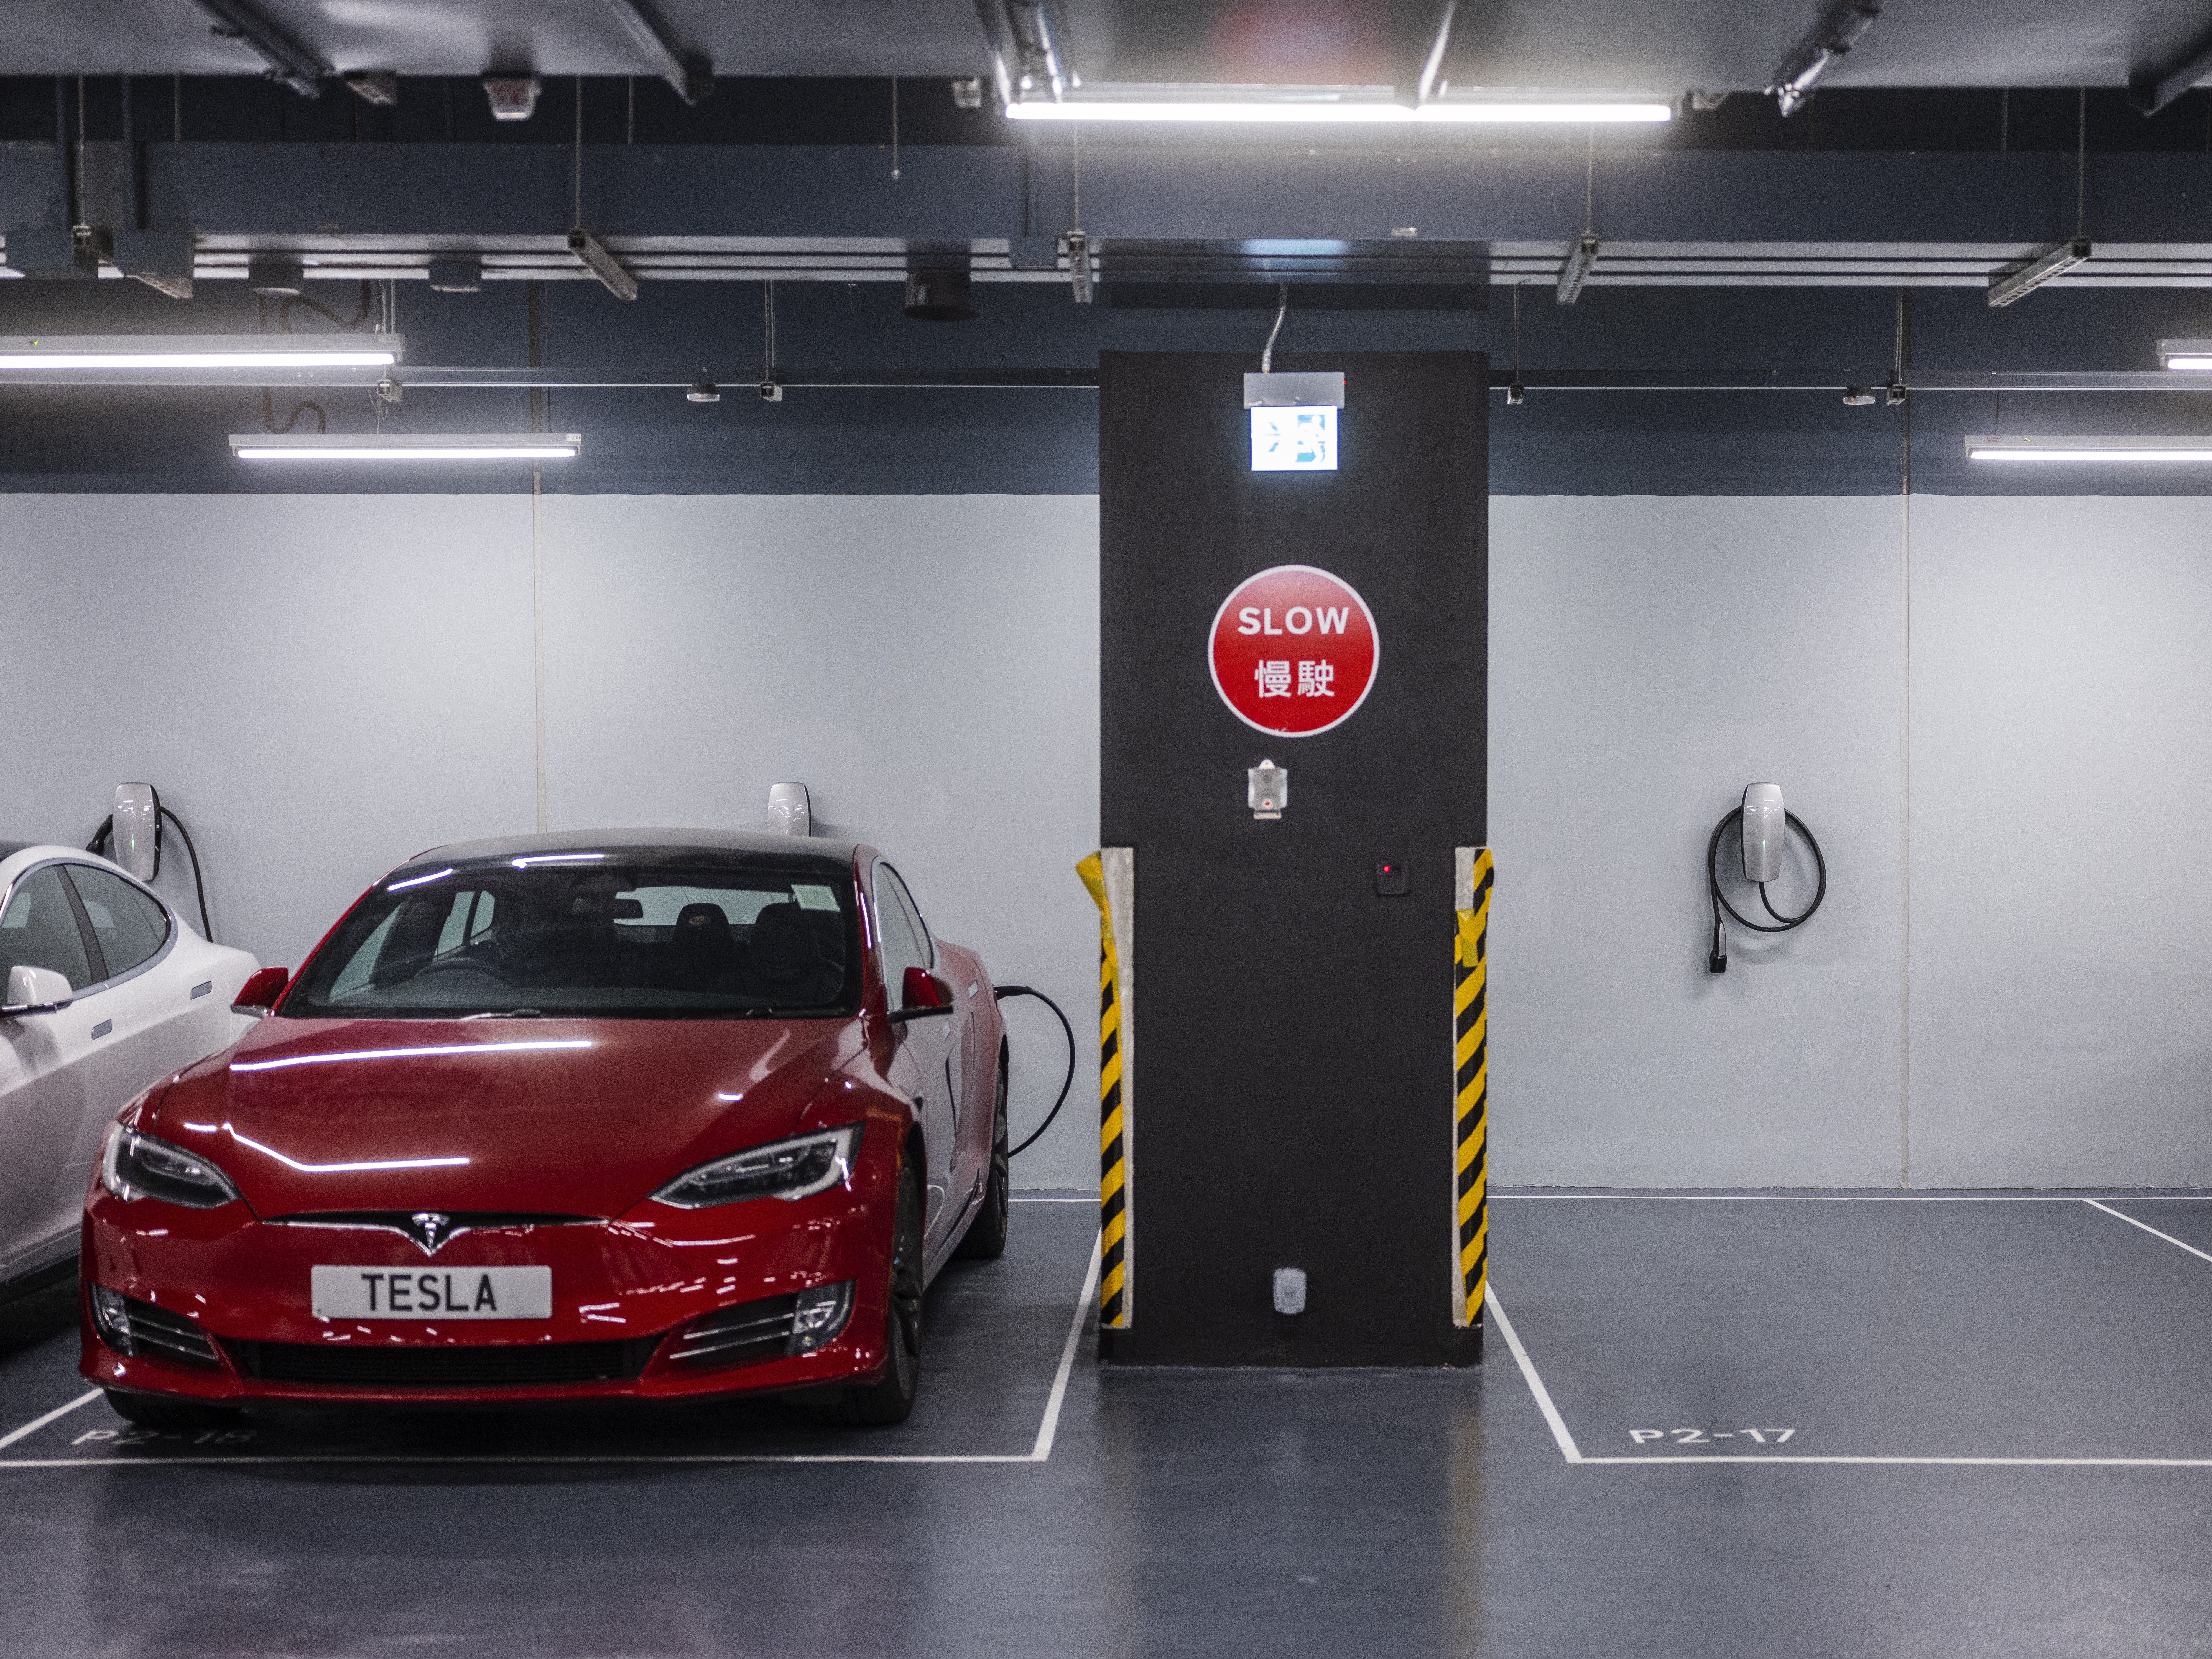 An electric vehicle gets charged at a facility in the Kowloon Bay in November 2018. Photo: Bloomberg